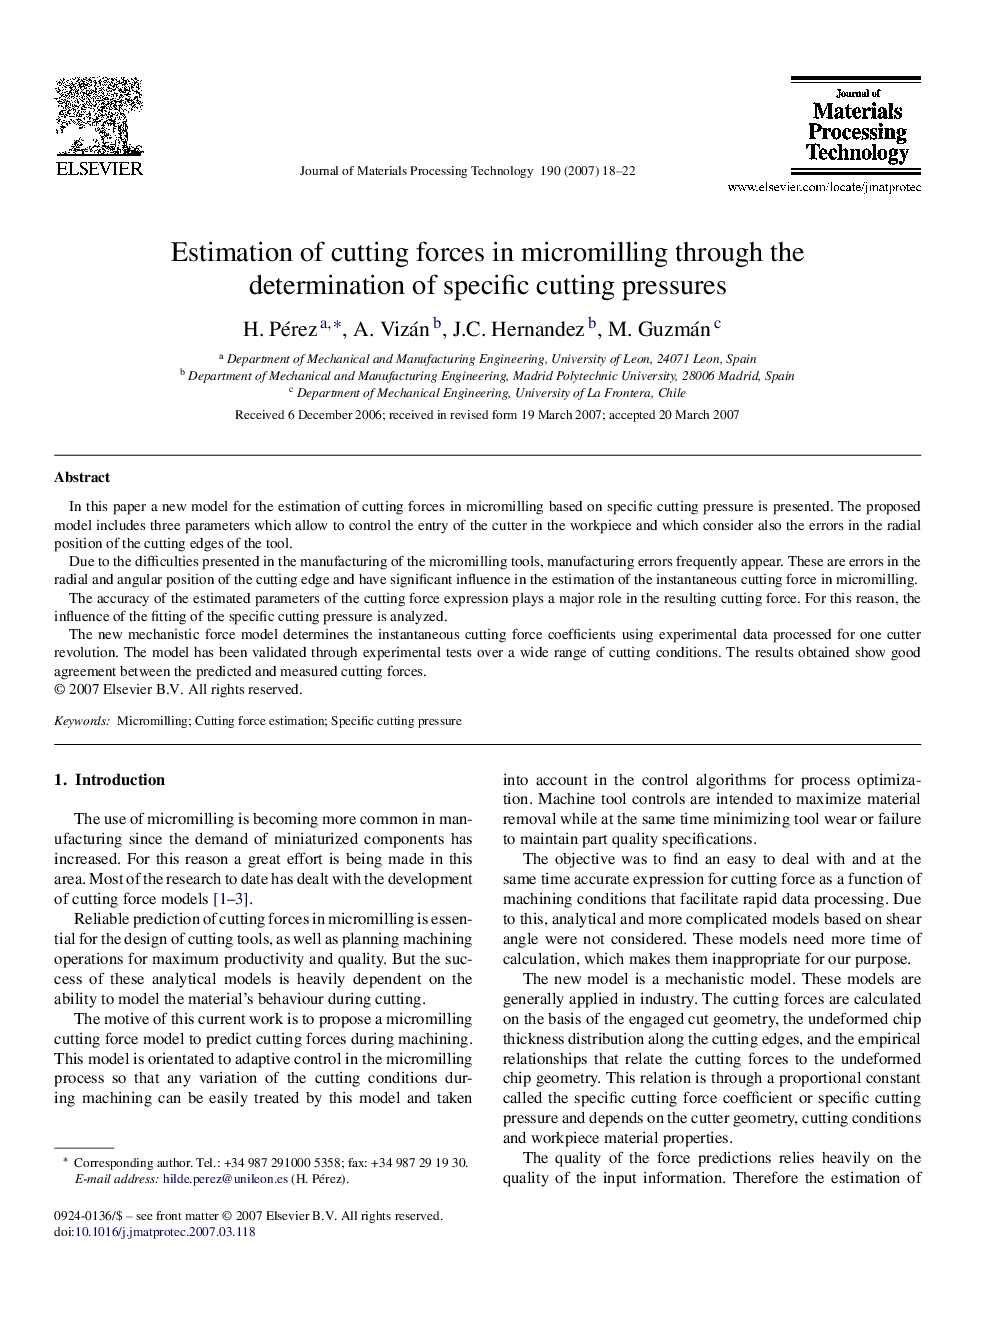 Estimation of cutting forces in micromilling through the determination of specific cutting pressures